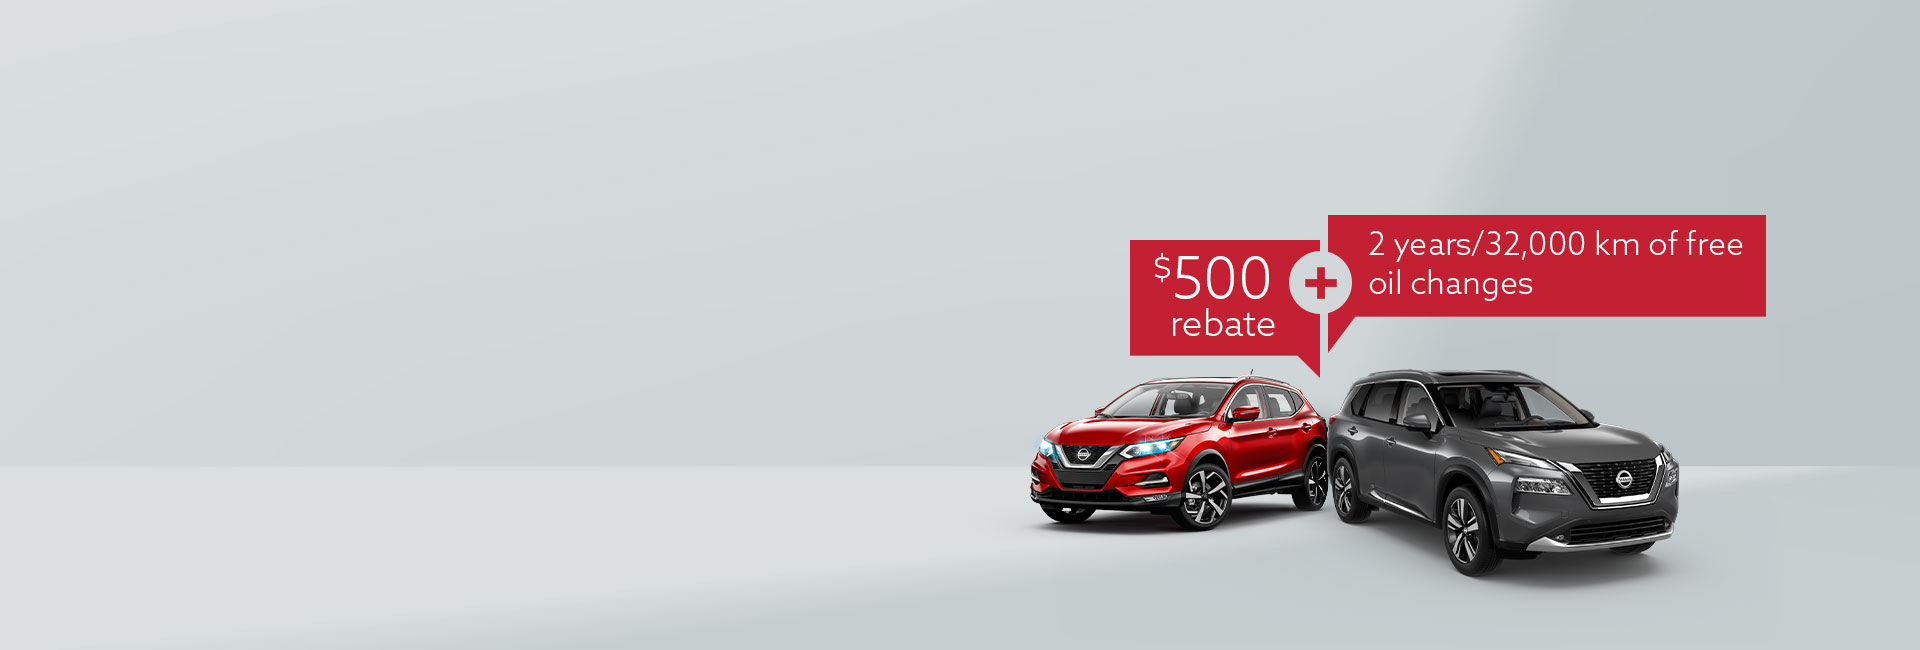 Get $500 rebate and 2 years of free oil changes,